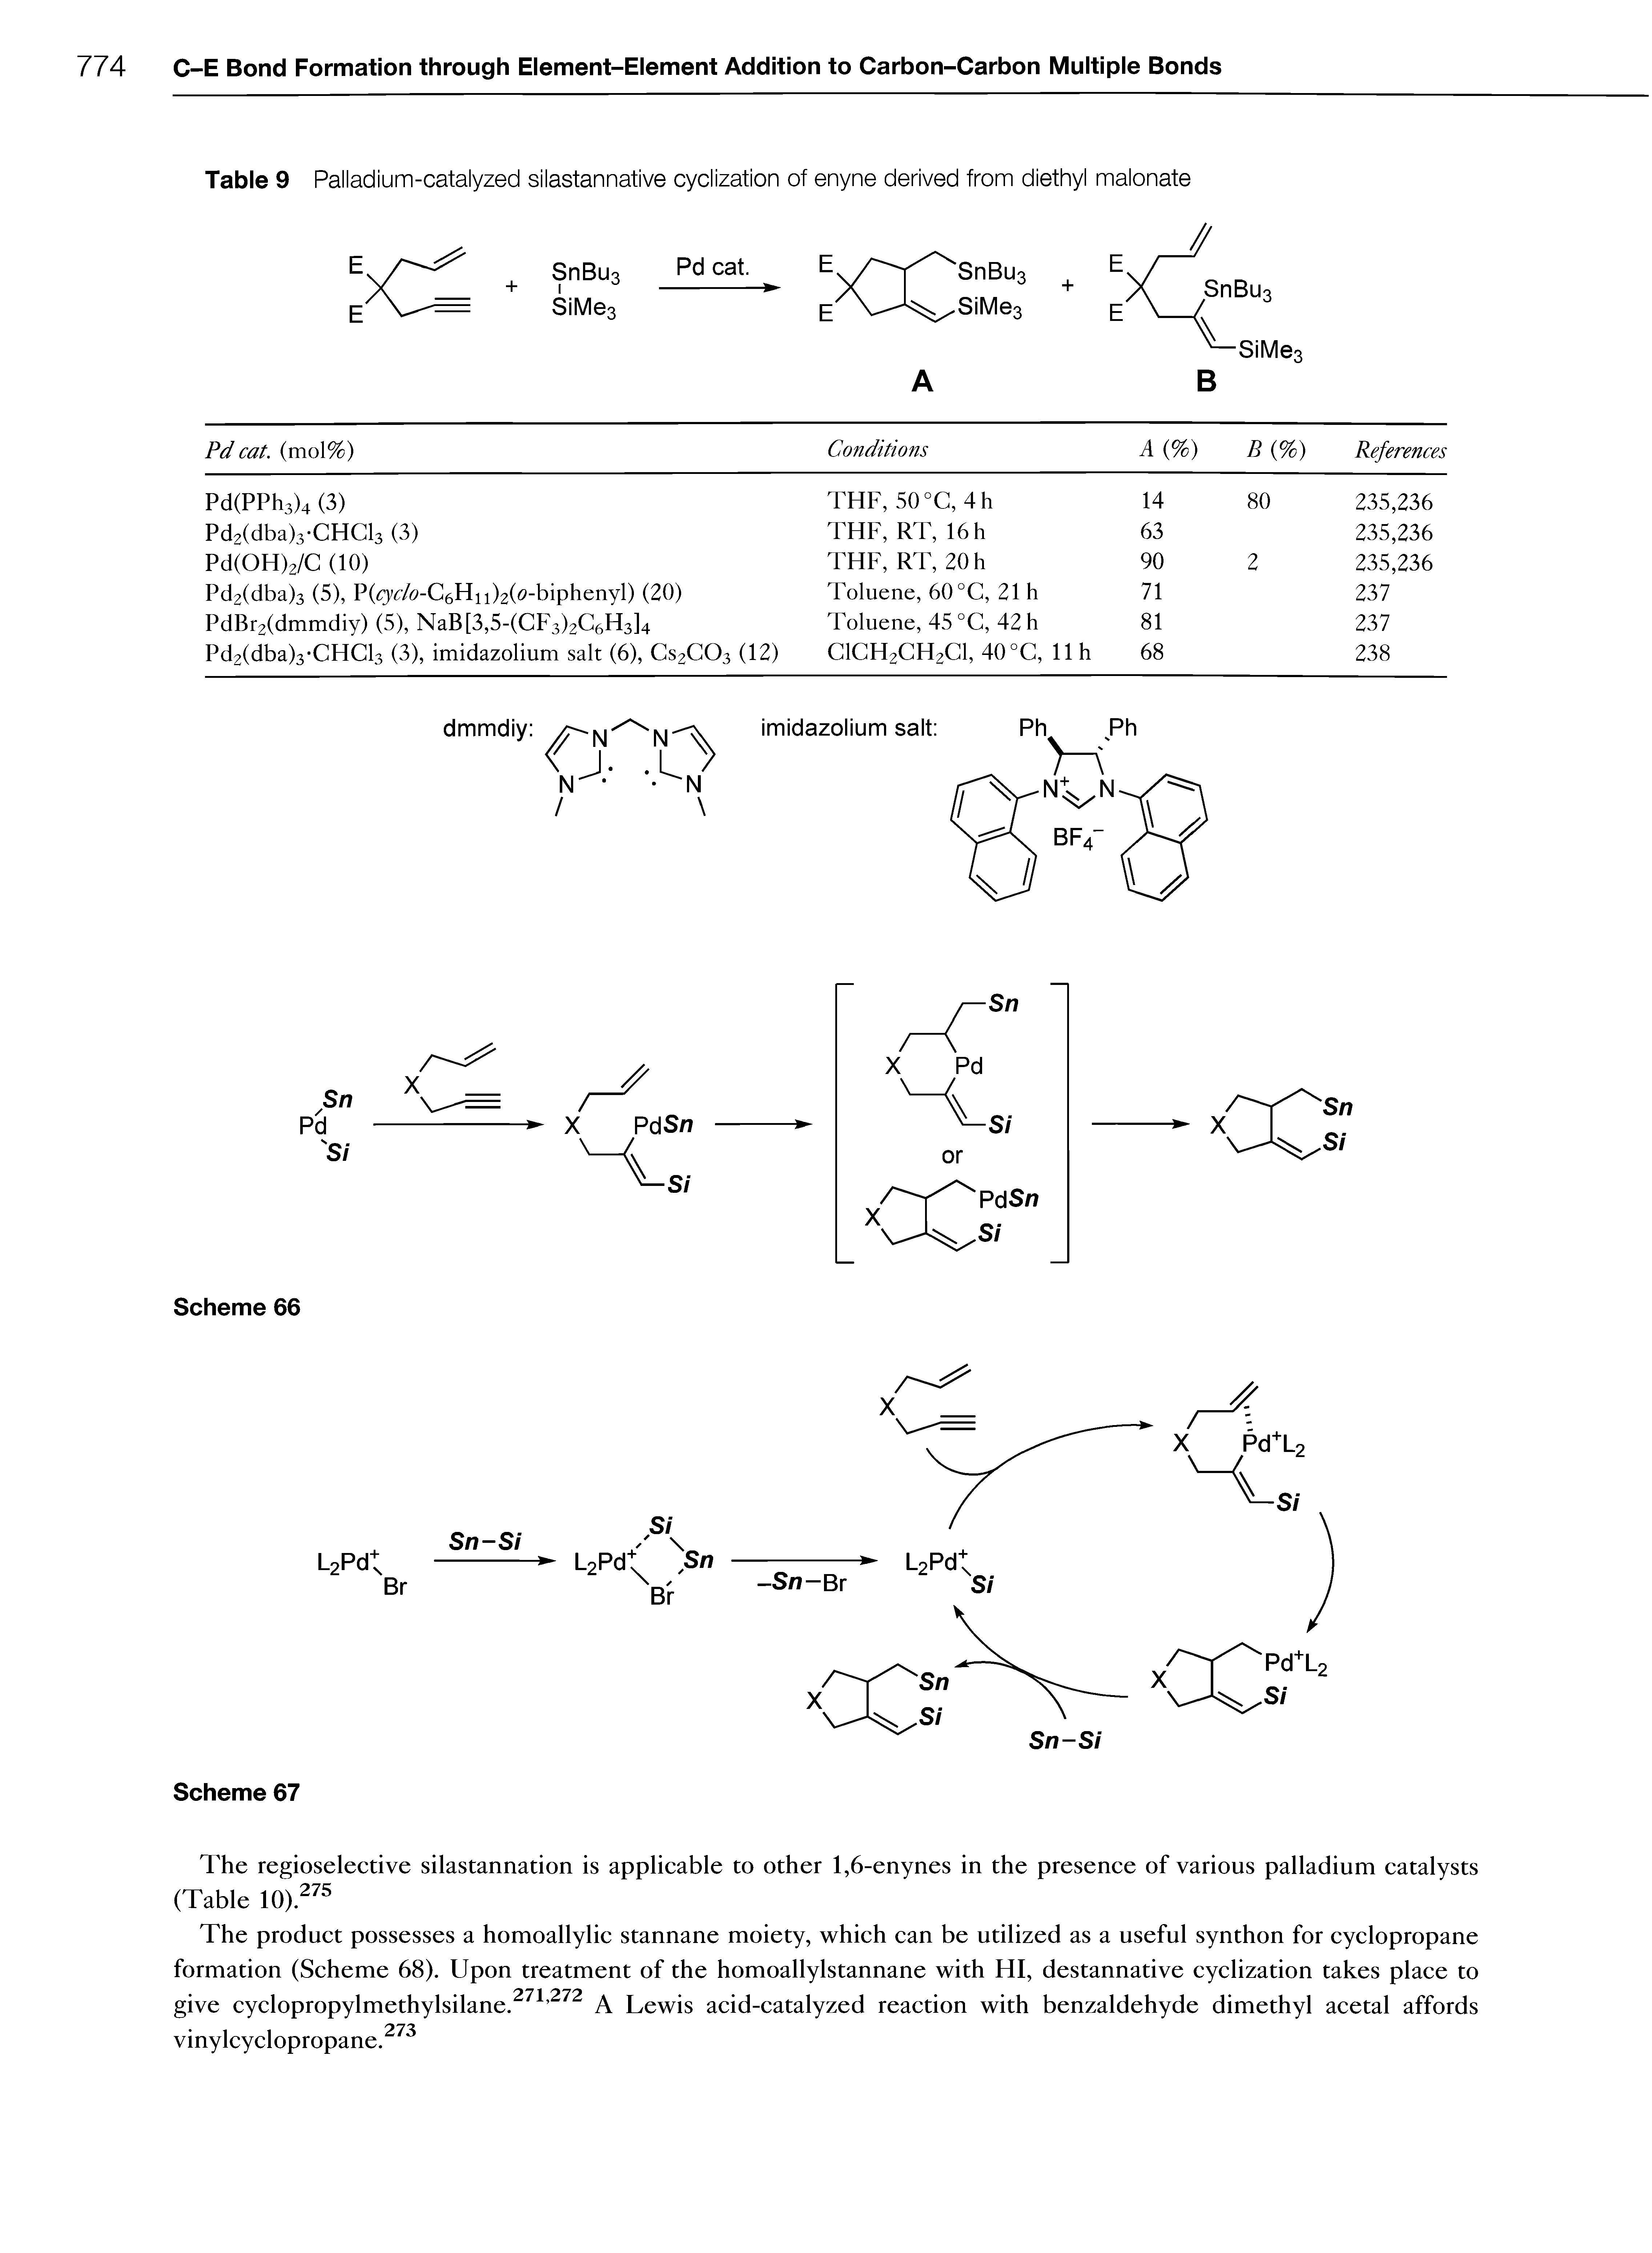 Table 9 Palladium-catalyzed silastannative cyclization of enyne derived from diethyl malonate...